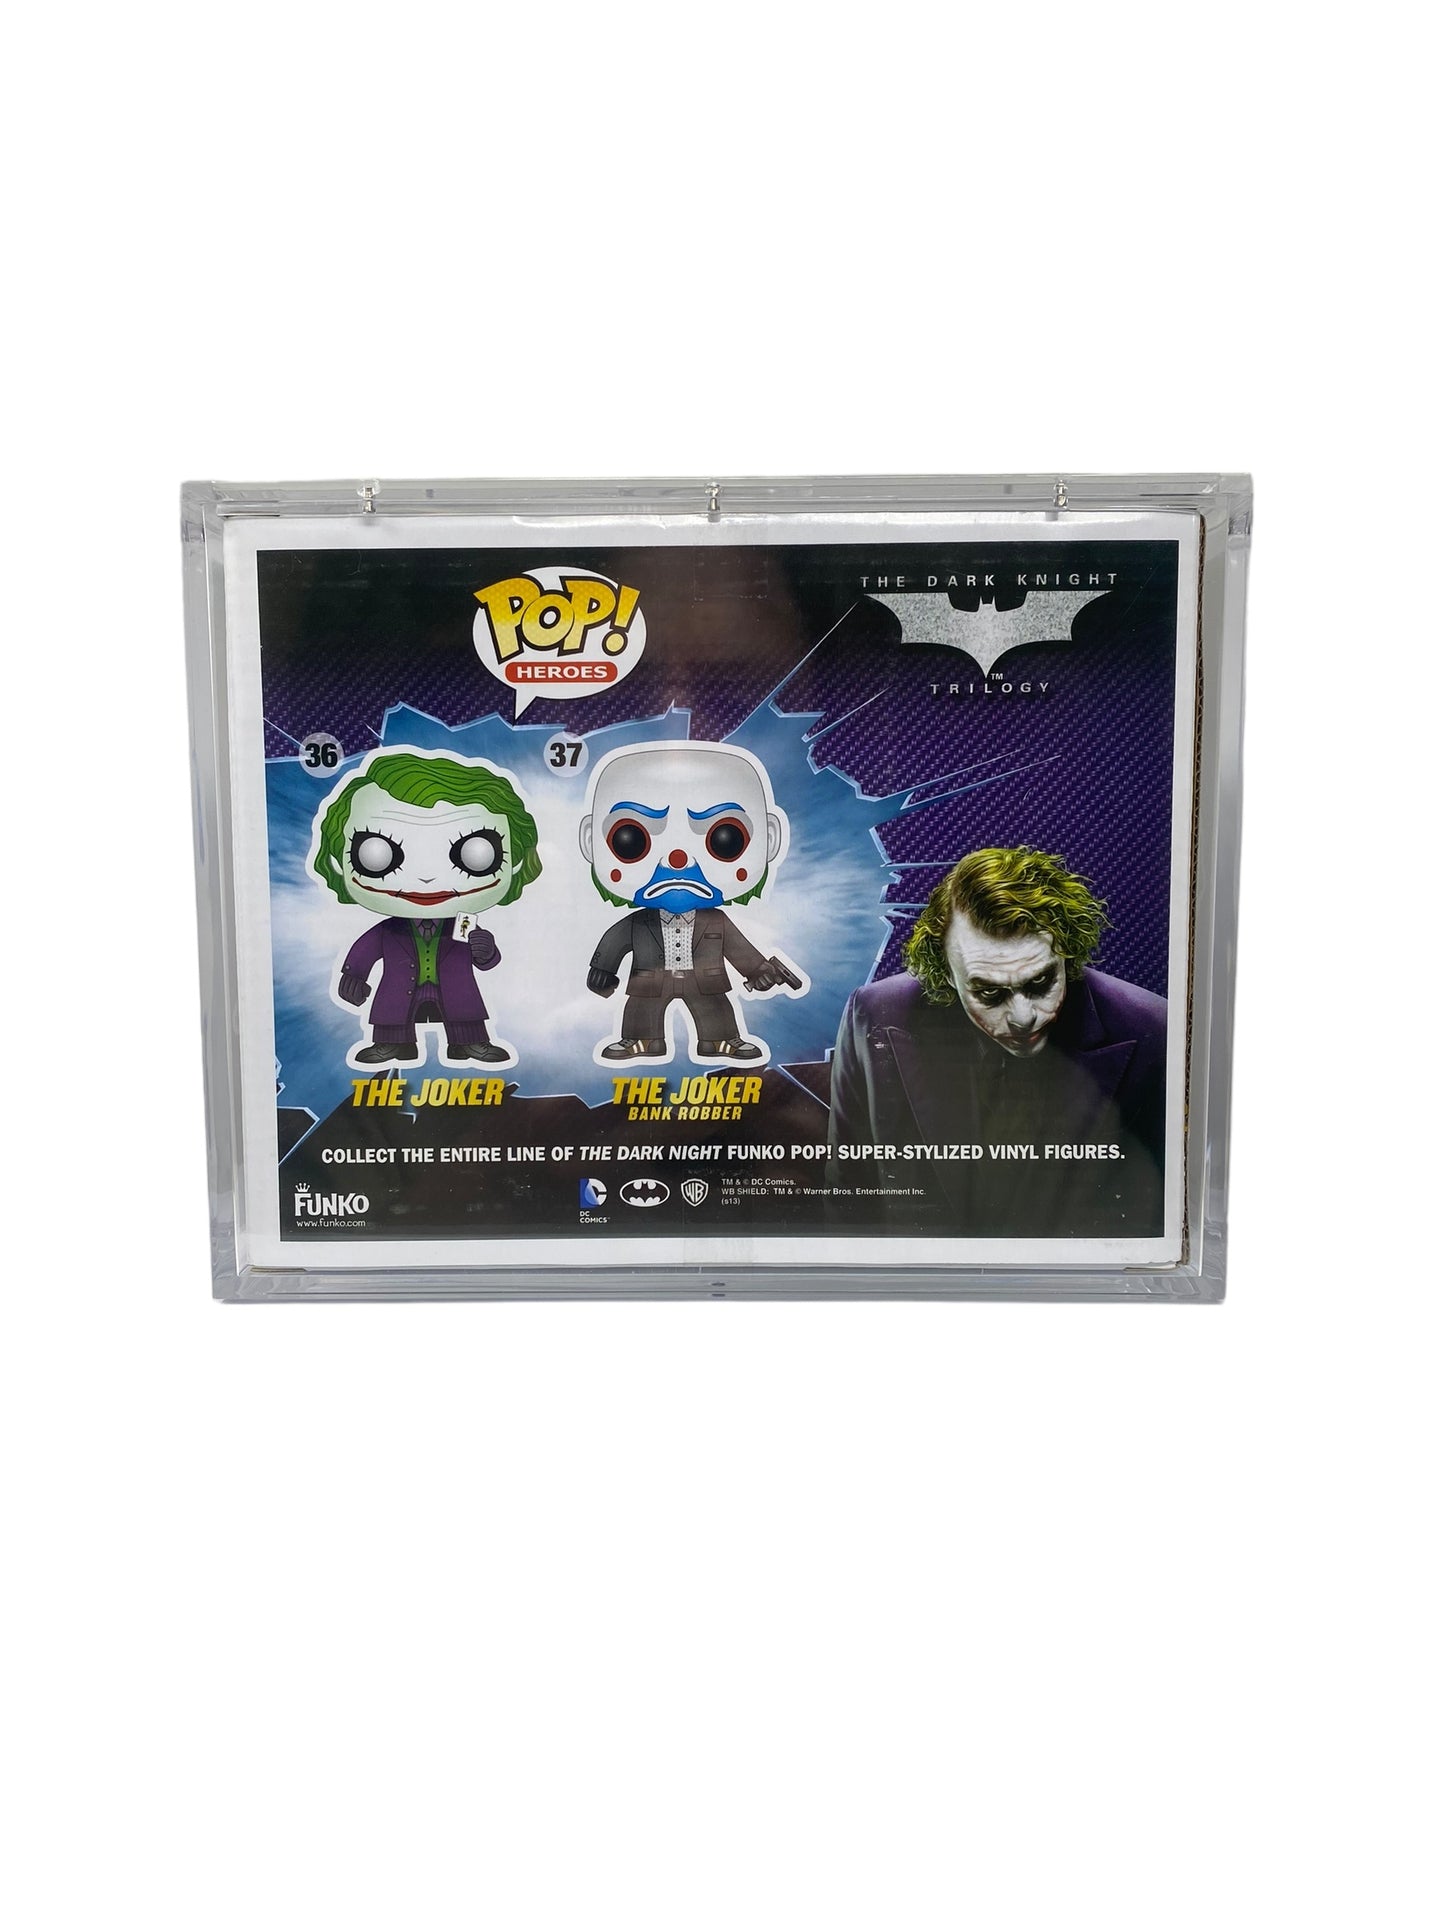 SOLD - 2013 The Joker 2-pack GITD Gemini Collectibles 480 pieces